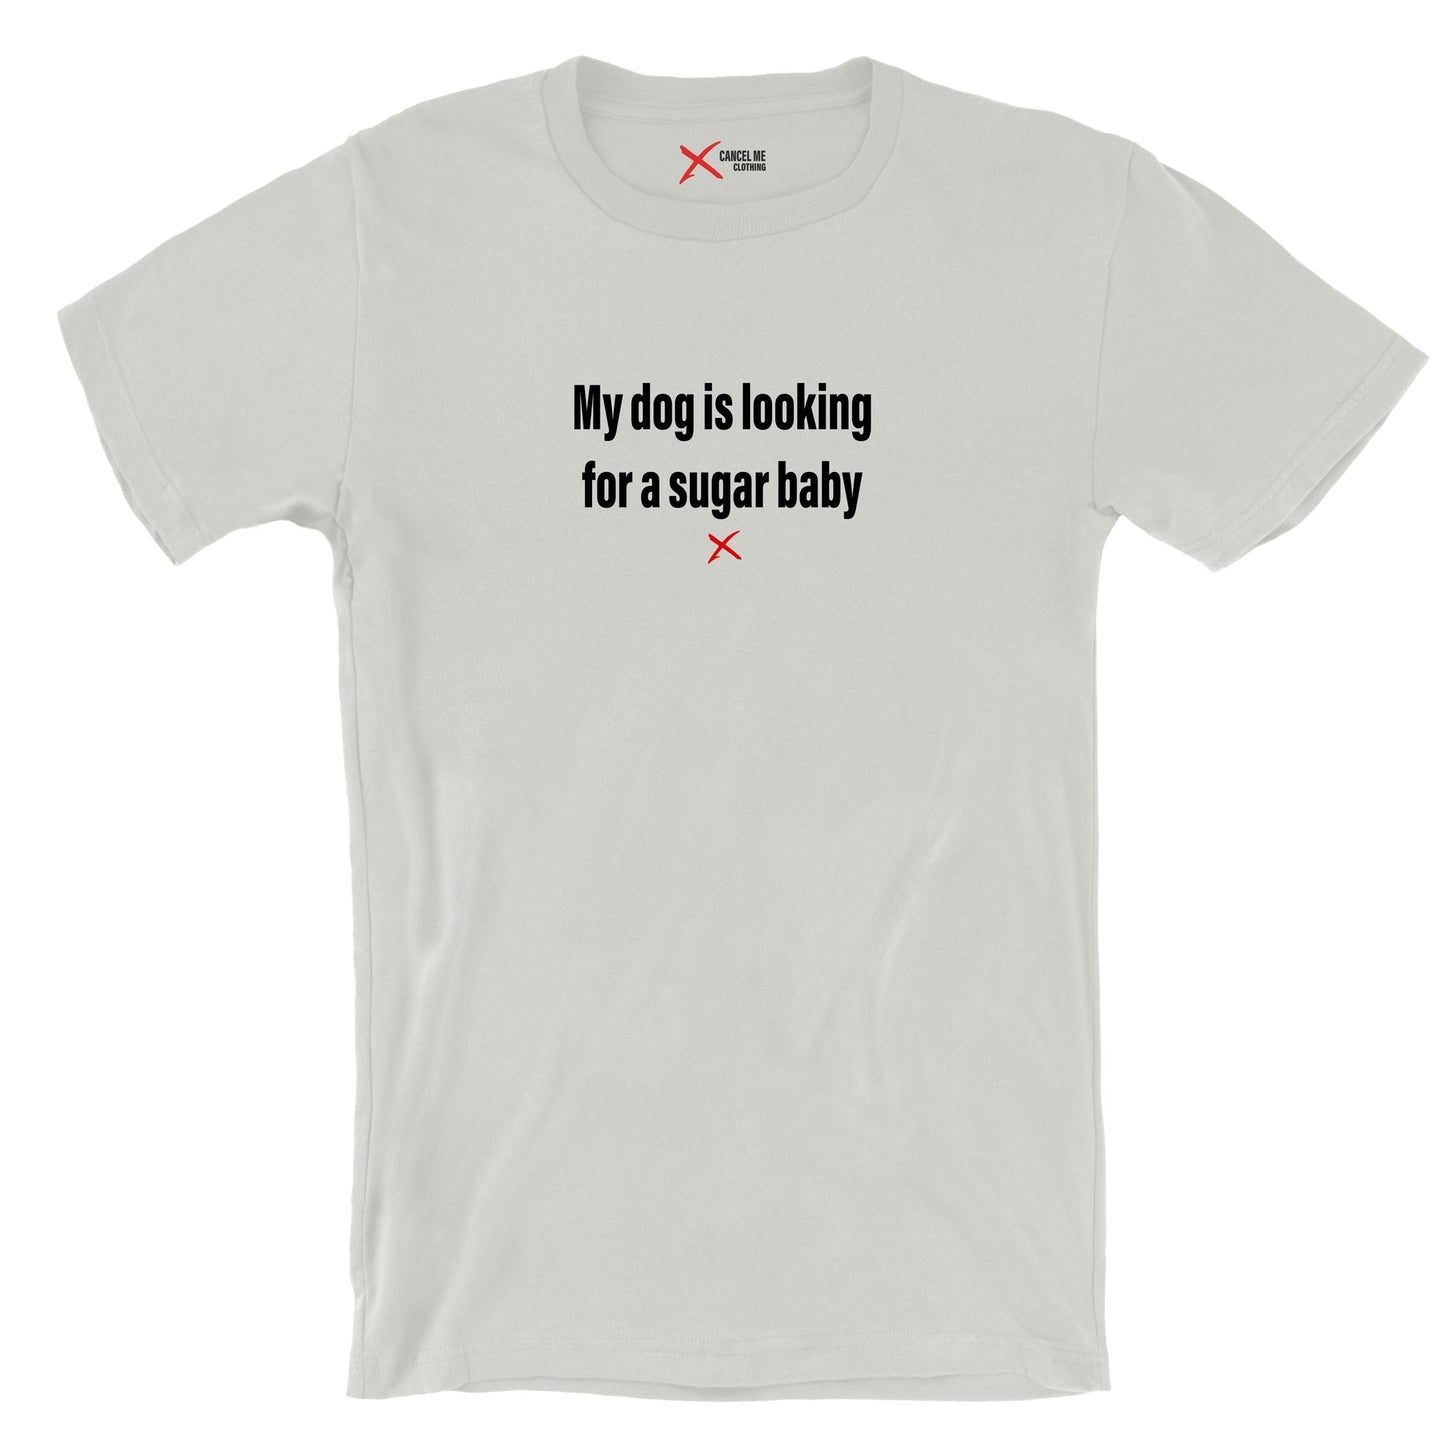 My dog is looking for a sugar baby - Shirt